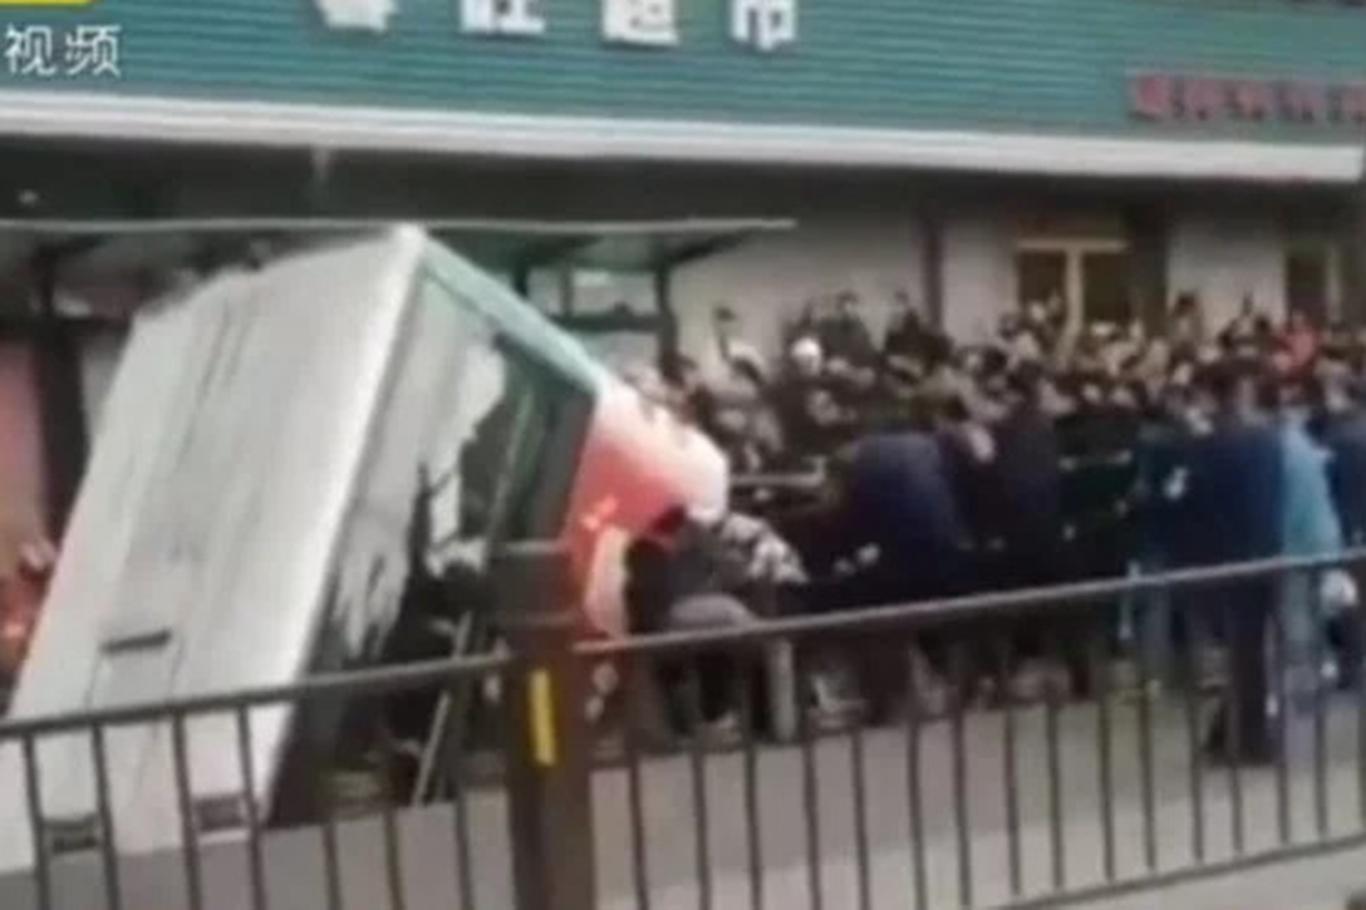 Sinkhole swallows a bus and pedestrians in China: 6 dead